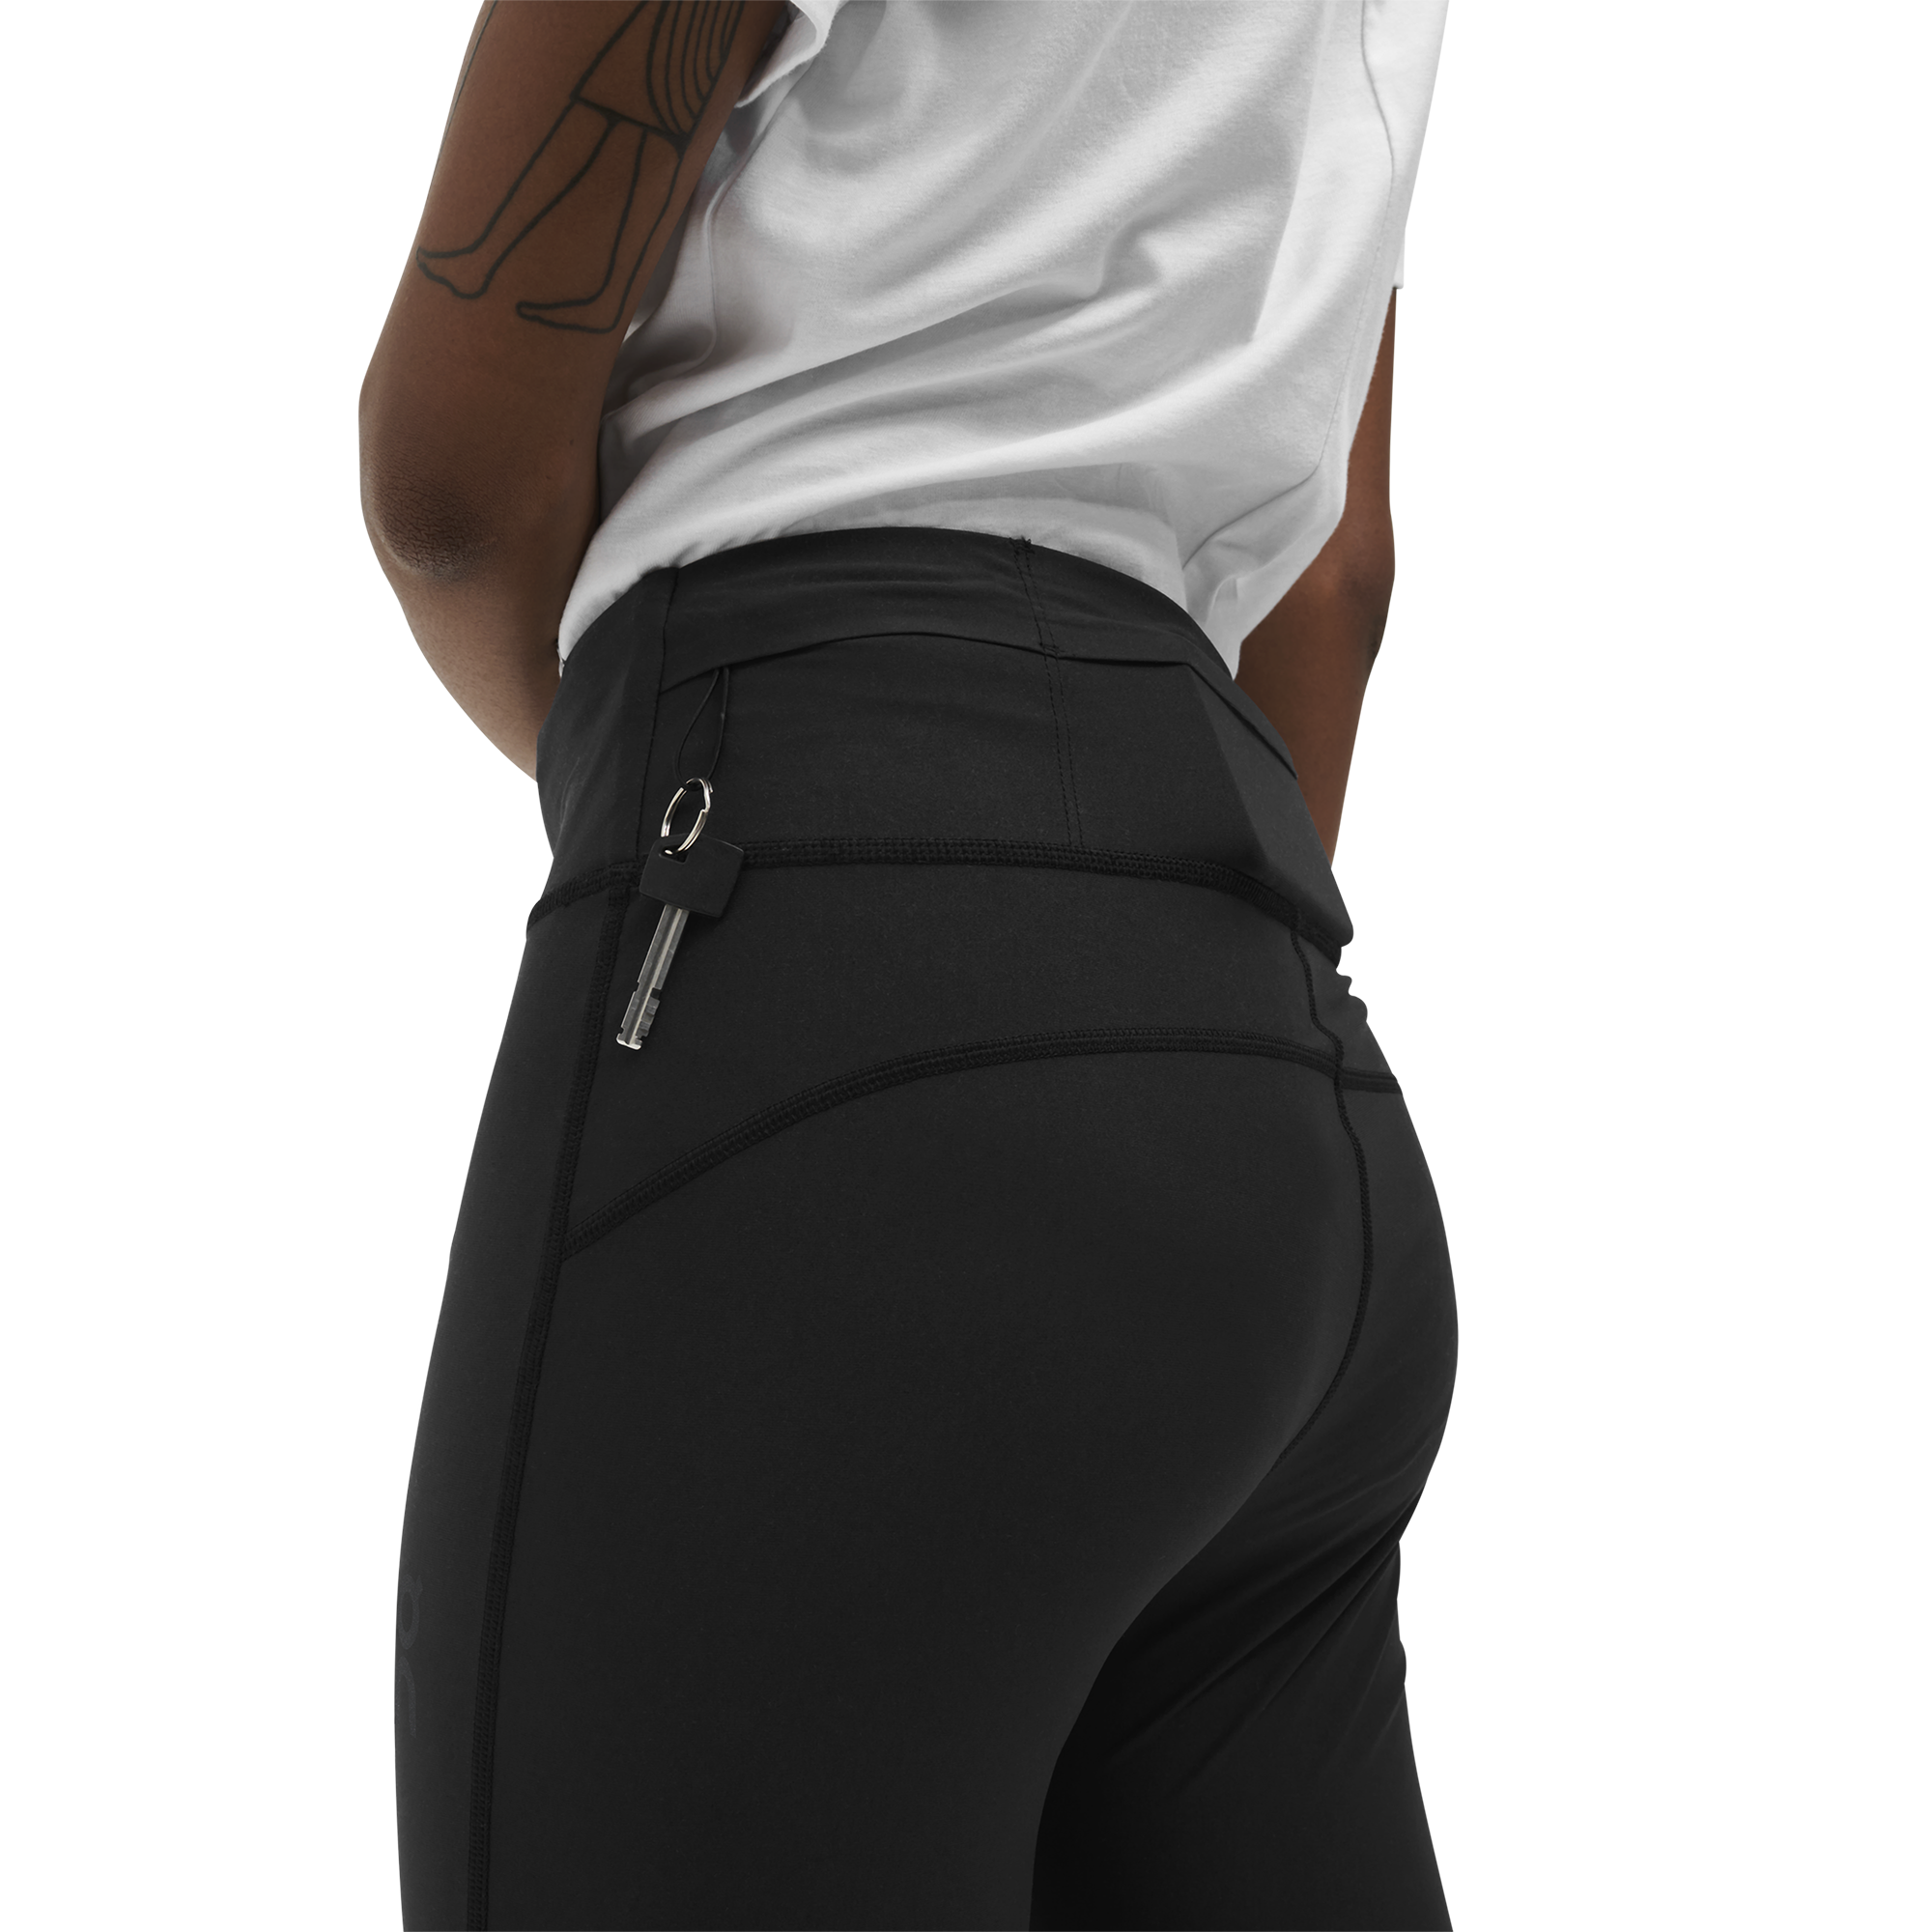 Buy Body Smith Women's Black Active Sports Tights Leggings Jeggings Online  - Get 21% Off